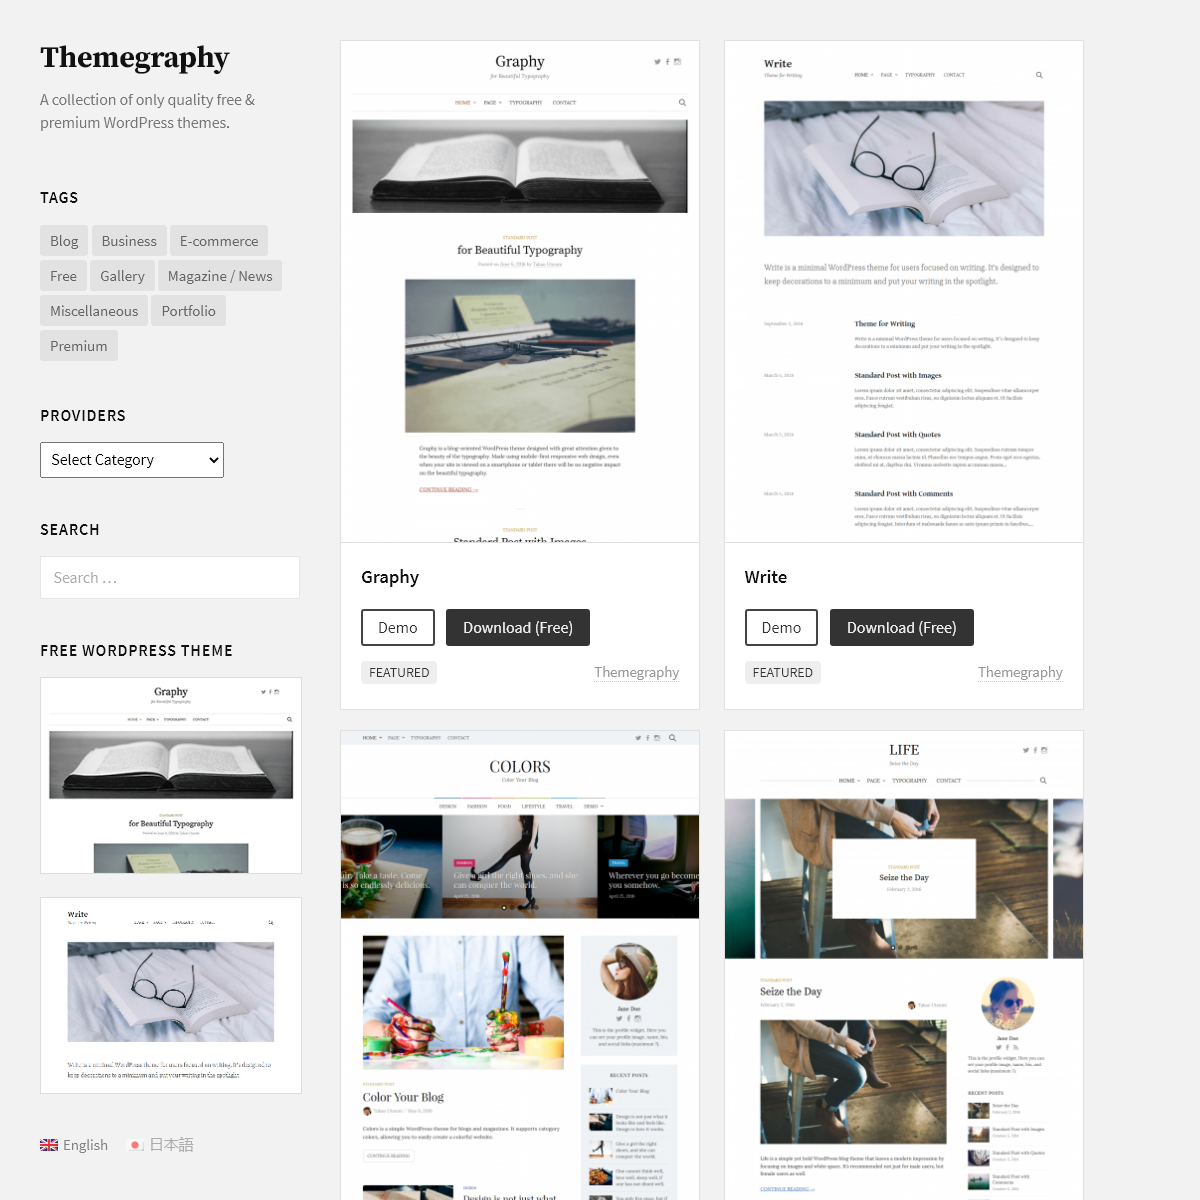 A complete backup of themegraphy.com